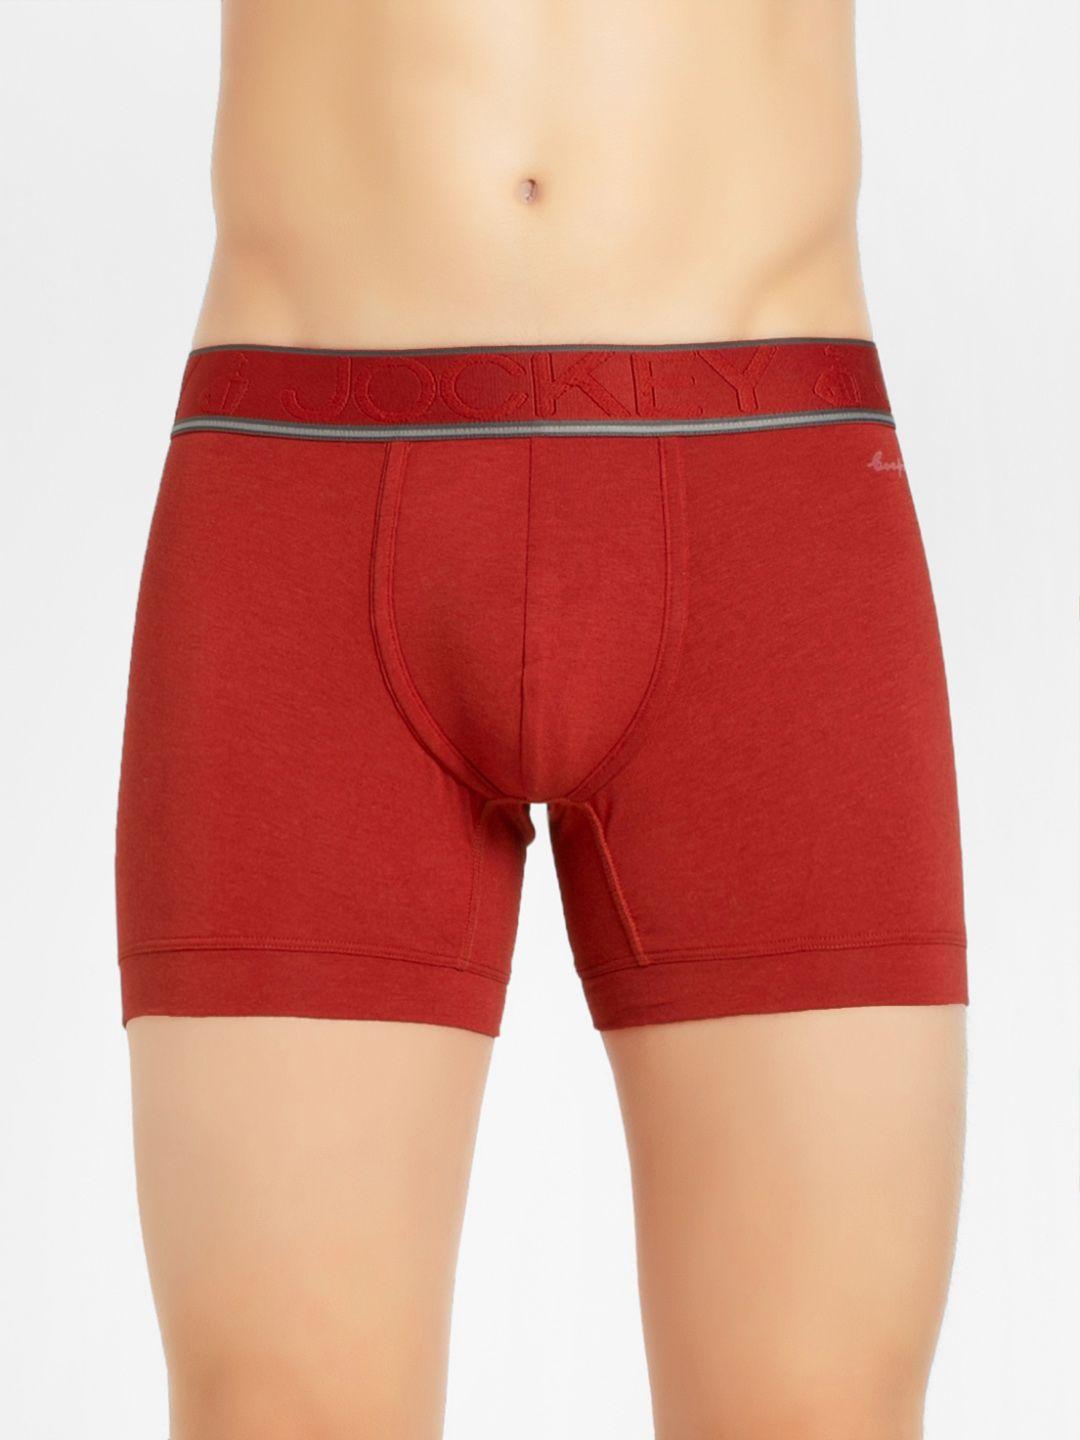 jockey heritage collection men red solid trunks hg16